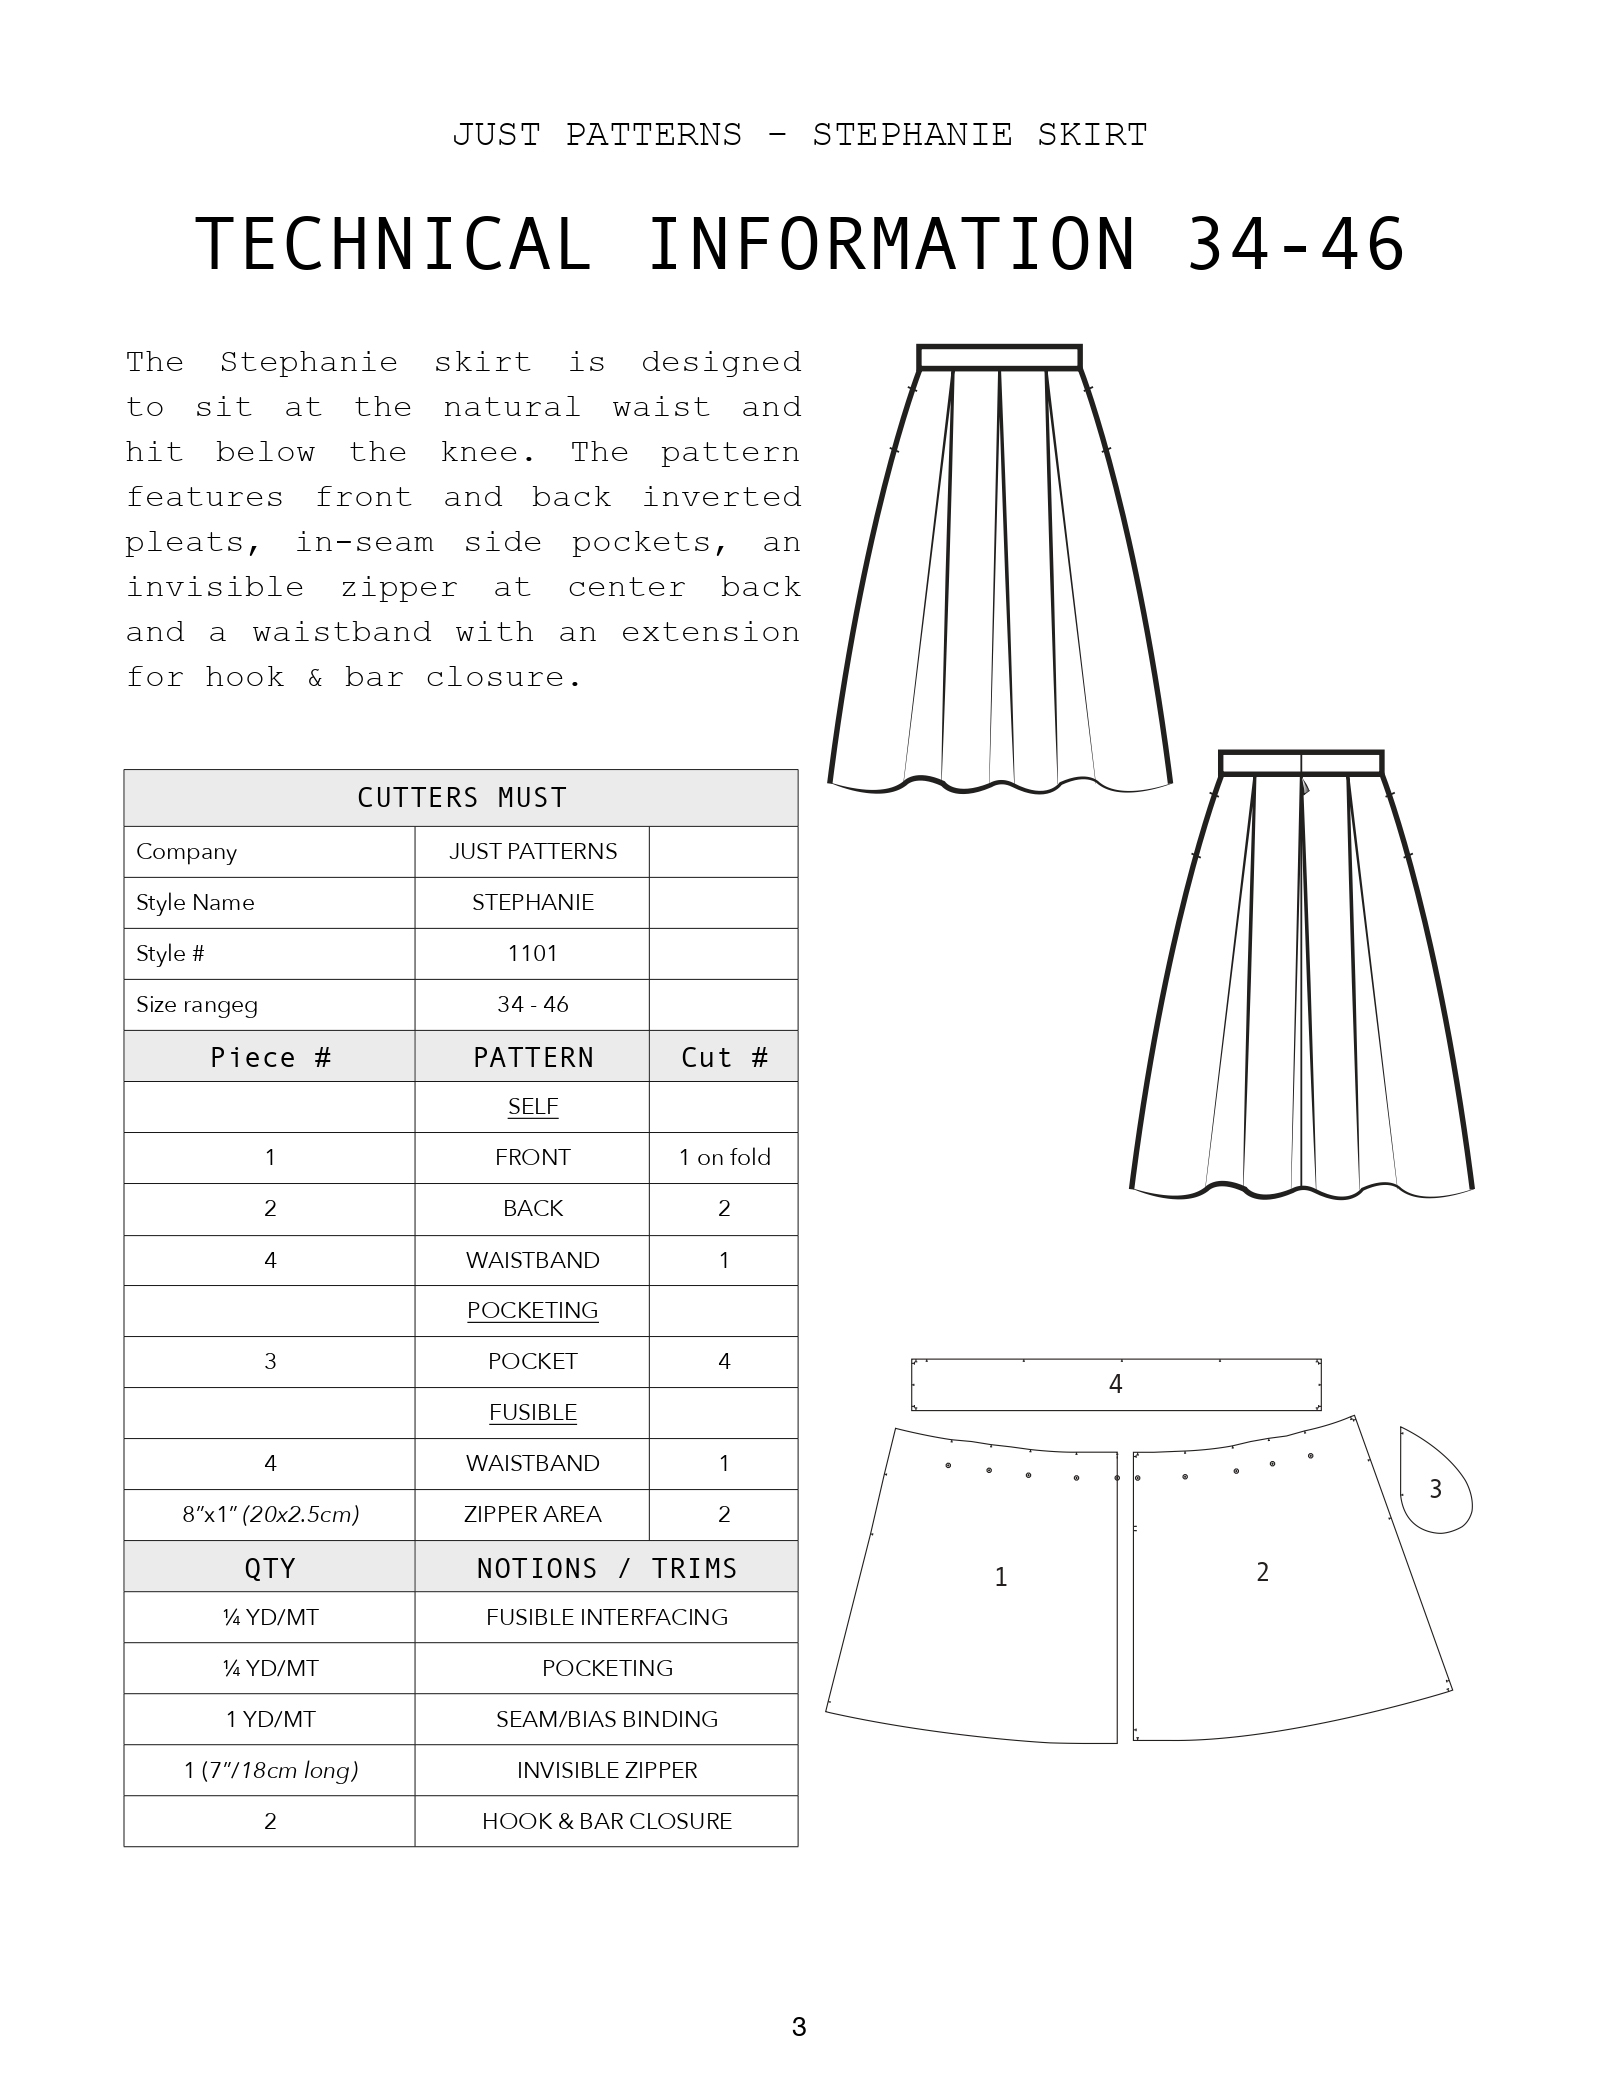 Just Patterns 1101 Stephanie Skirt Downloadable Pattern